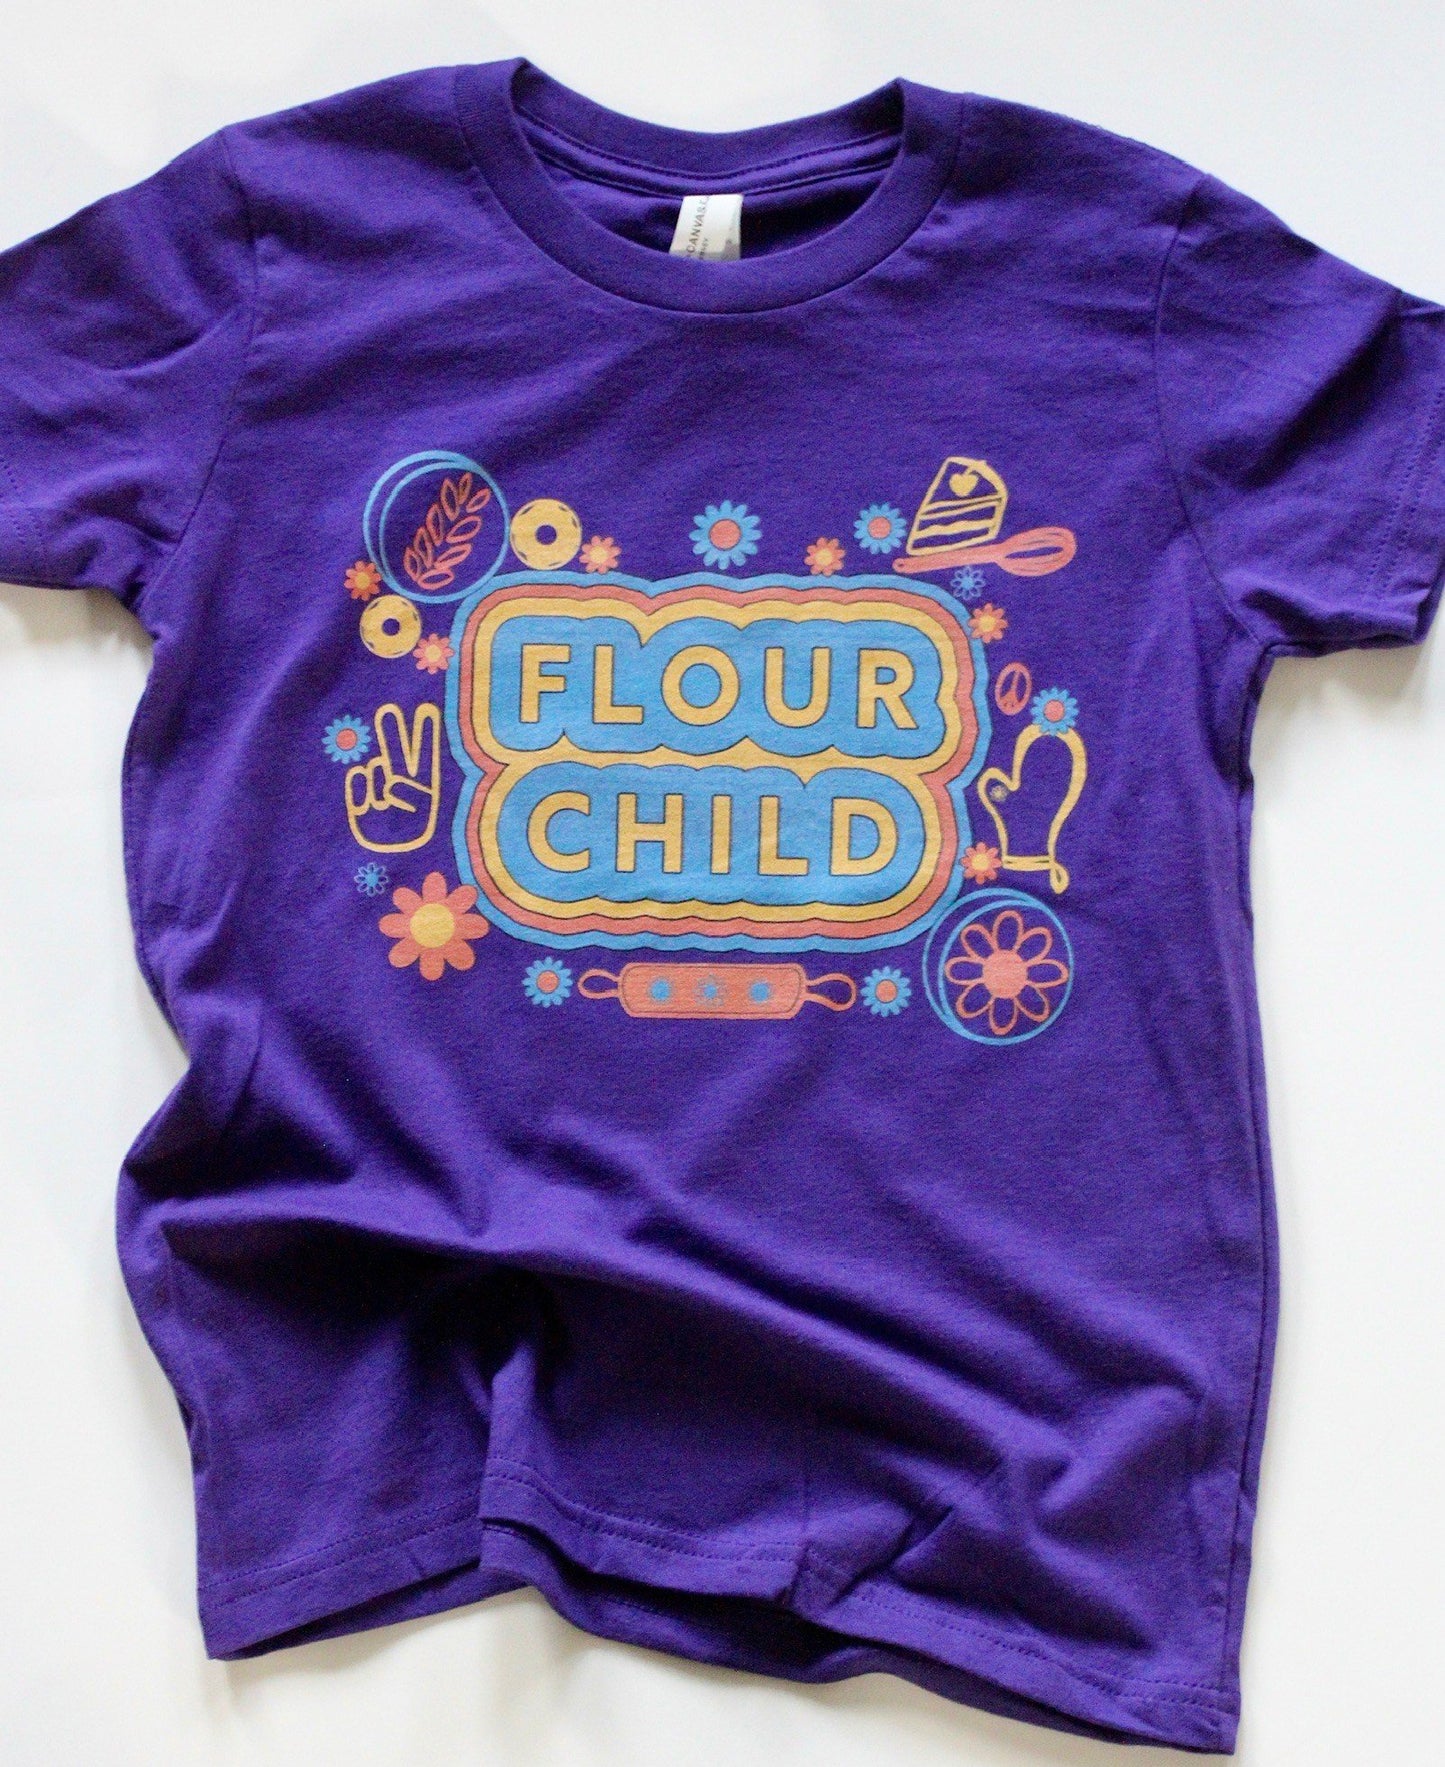 A purple youth tee with the words Flour Child and colorful illustrations